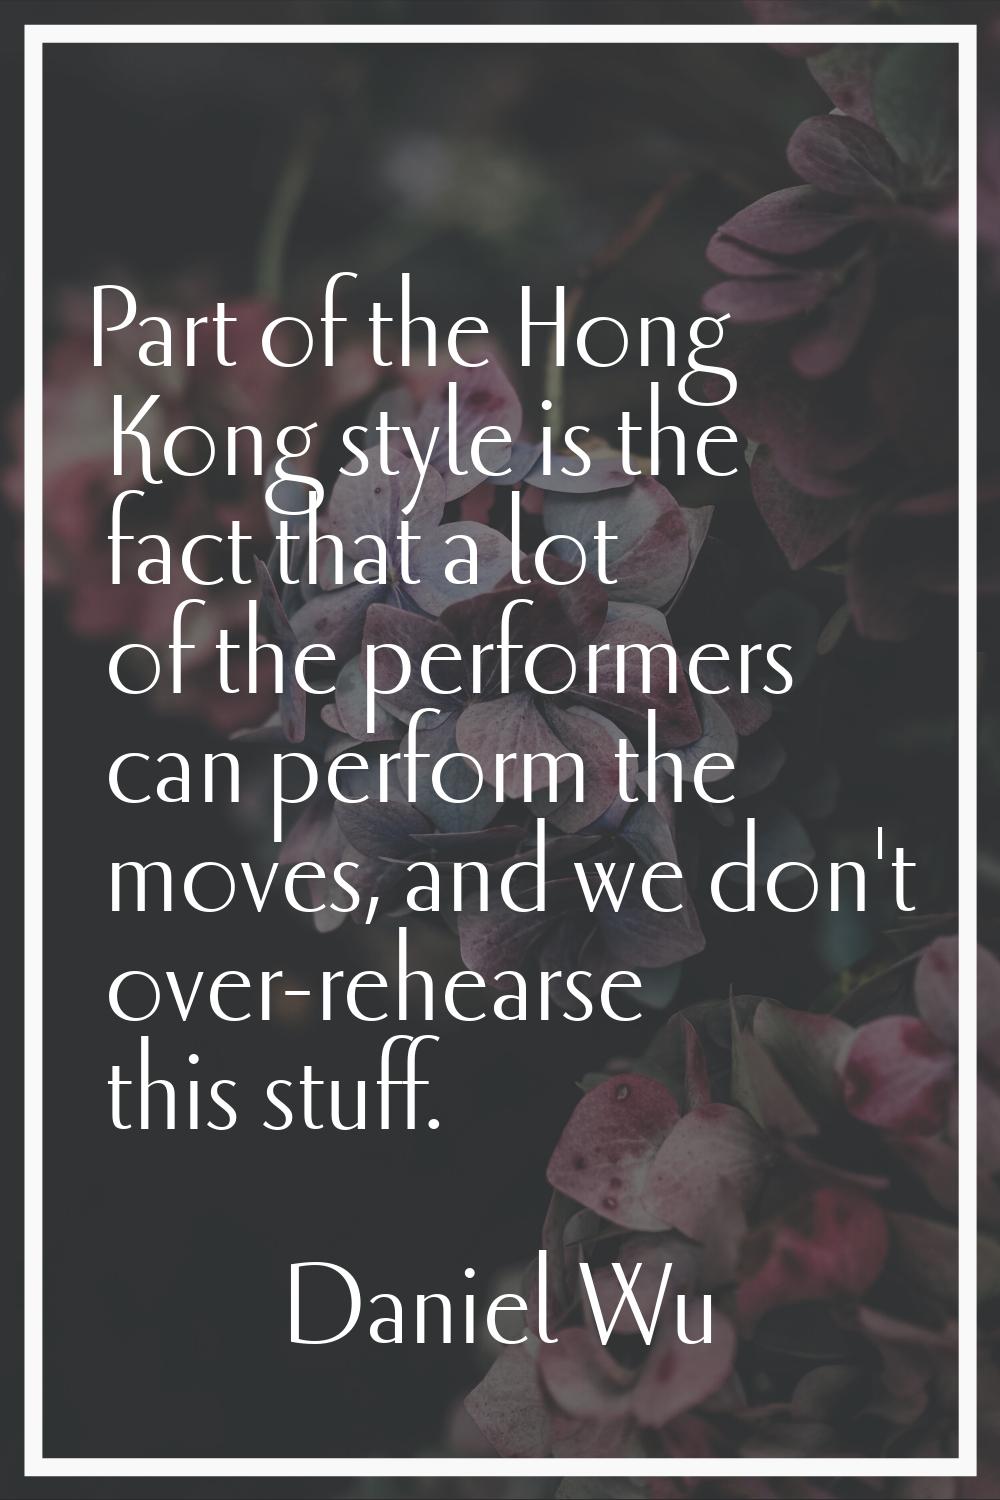 Part of the Hong Kong style is the fact that a lot of the performers can perform the moves, and we 